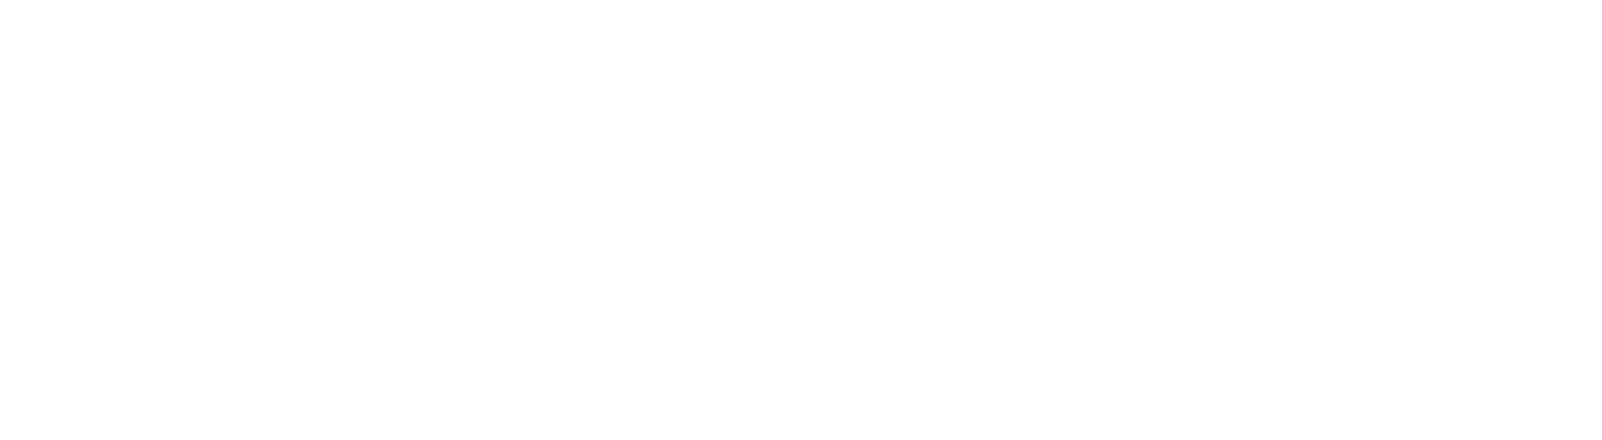 Equity Release Council logo